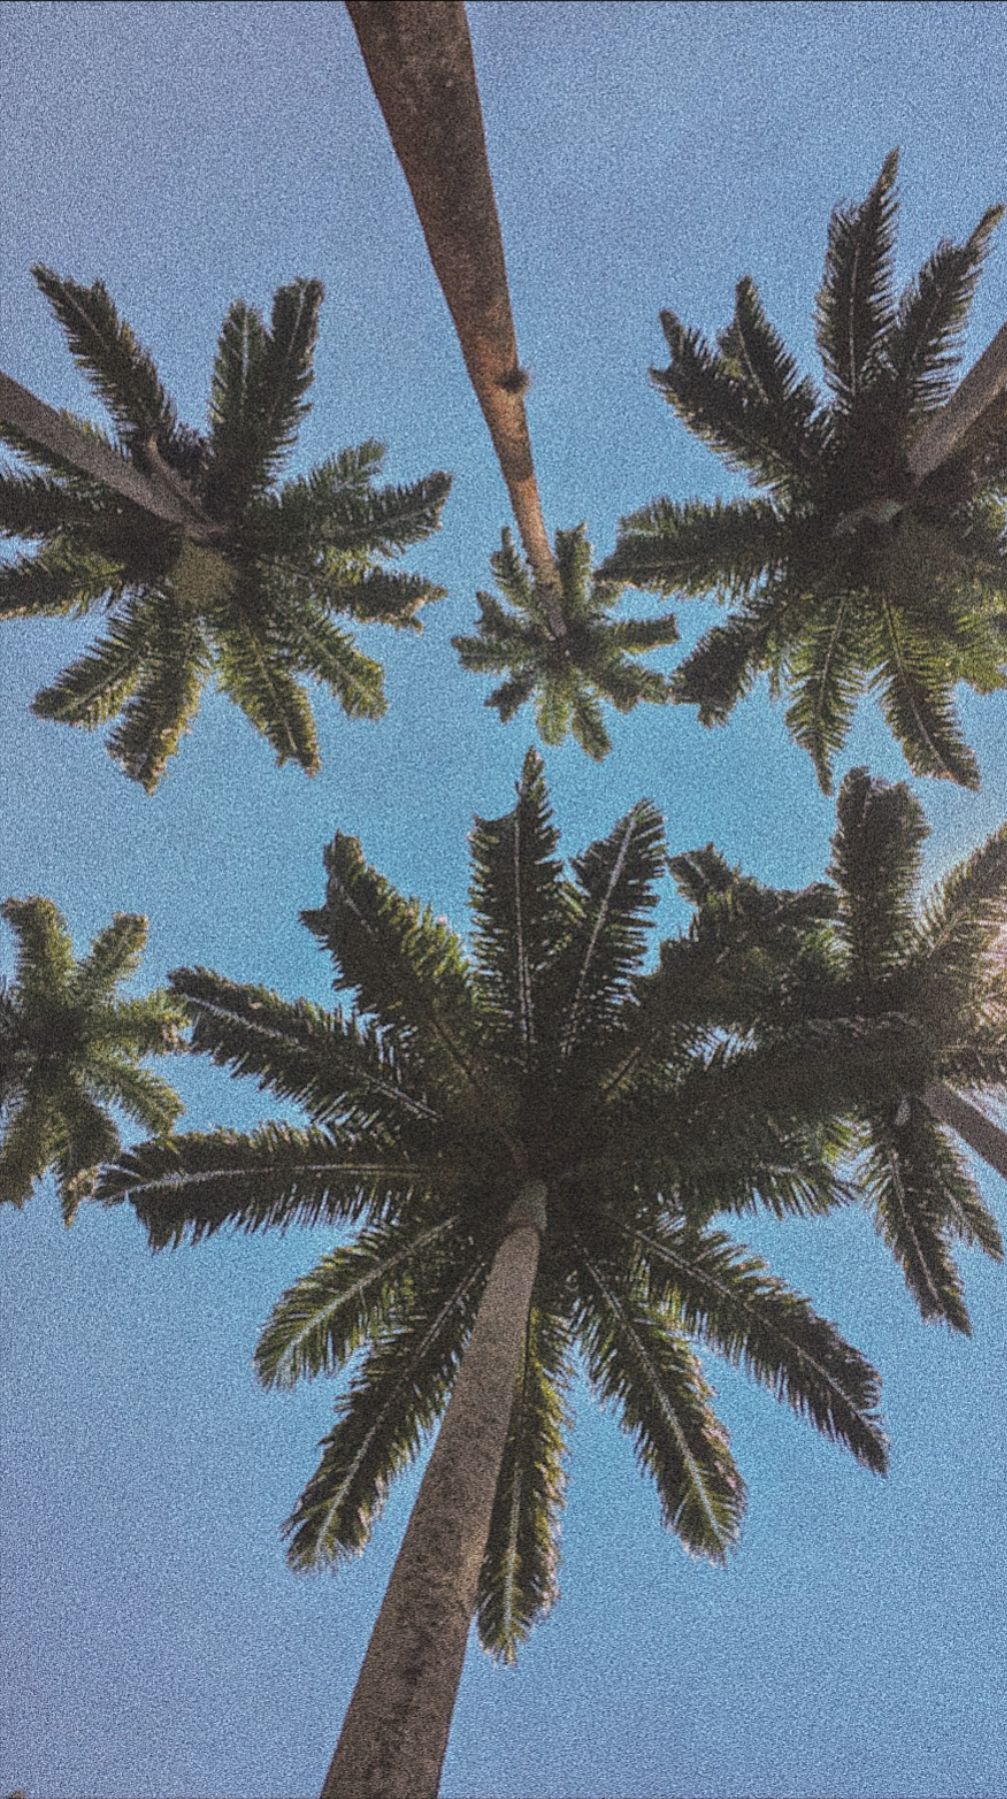 Palm Trees Aesthetic Wallpaper